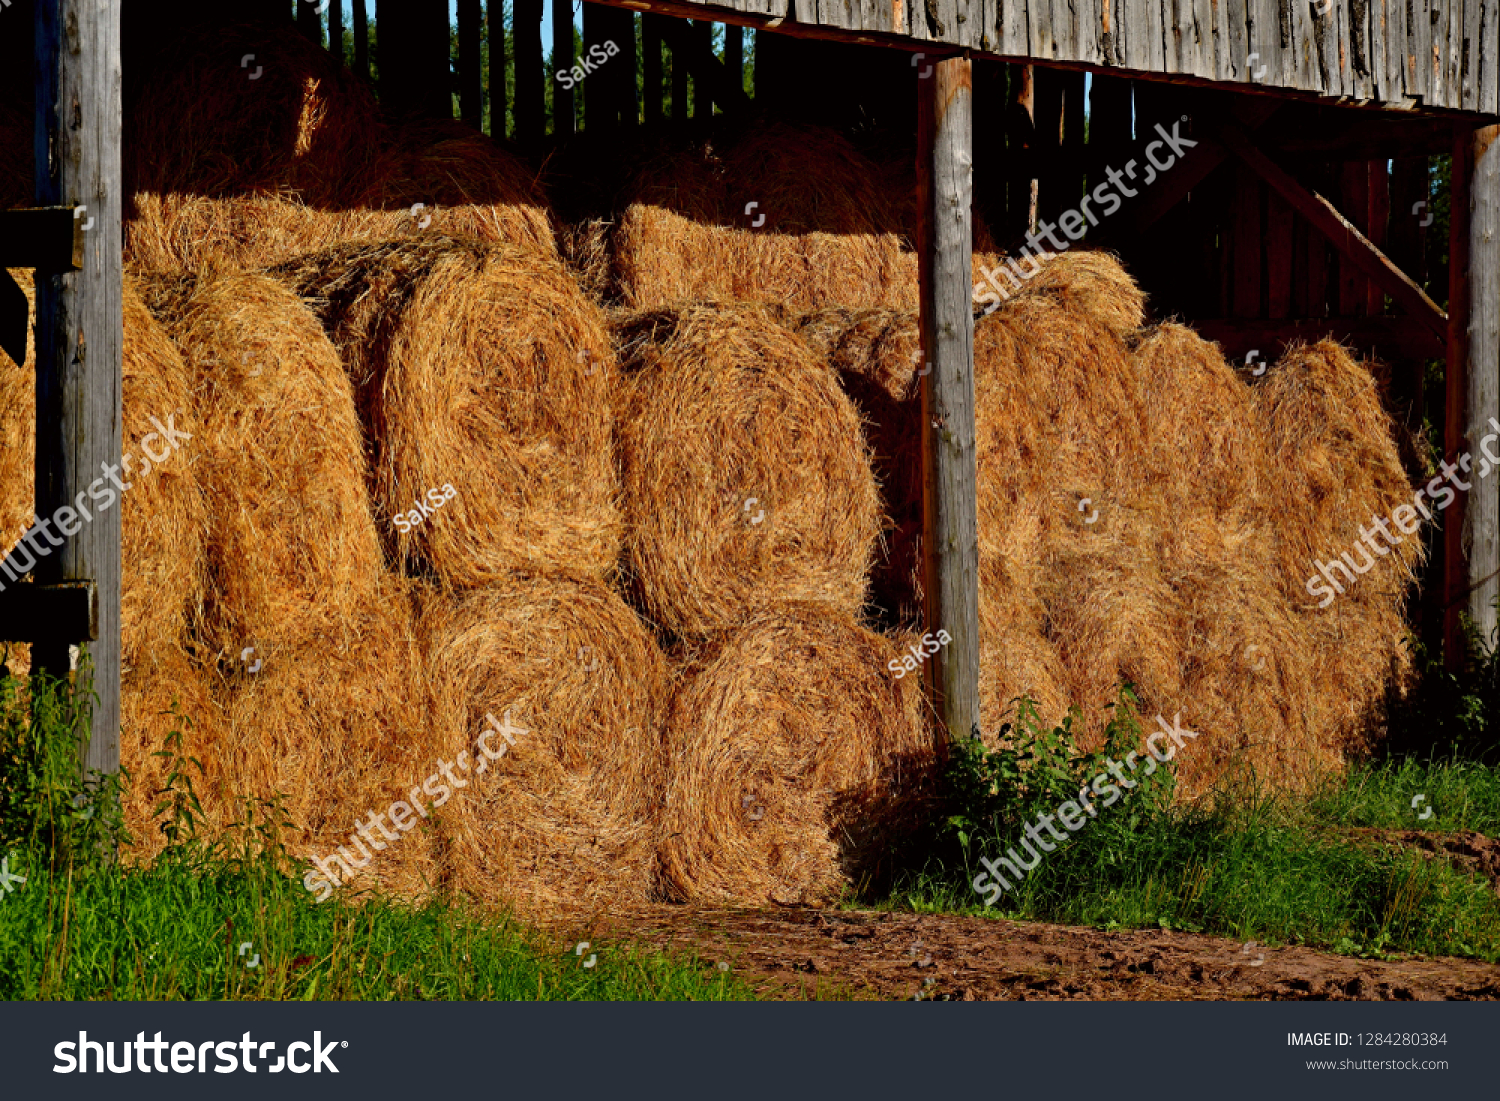 Dry baled hay bales stack, rural countryside straw background. Hay bales straw storage shed full of bales hay on agricultural farm. Rural land cowshed farm with hay straw bales stack under old shed #1284280384